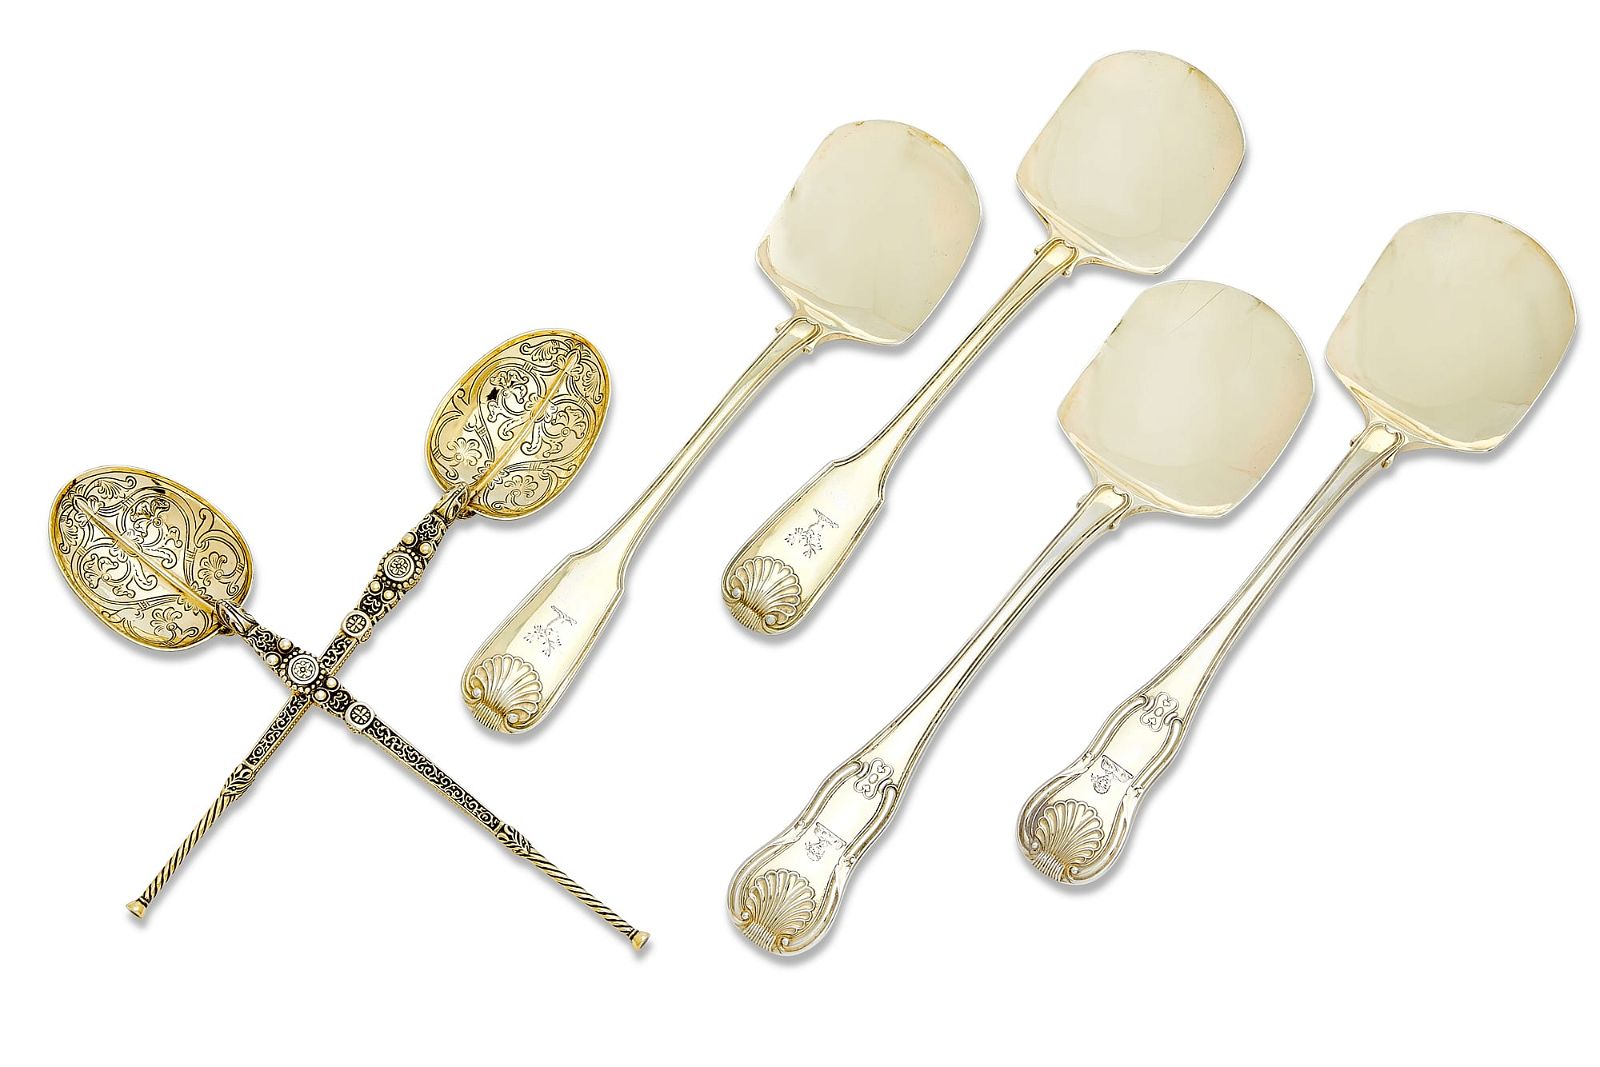 SIX ENGLISH STERLING SILVER GILT SPOONSSix